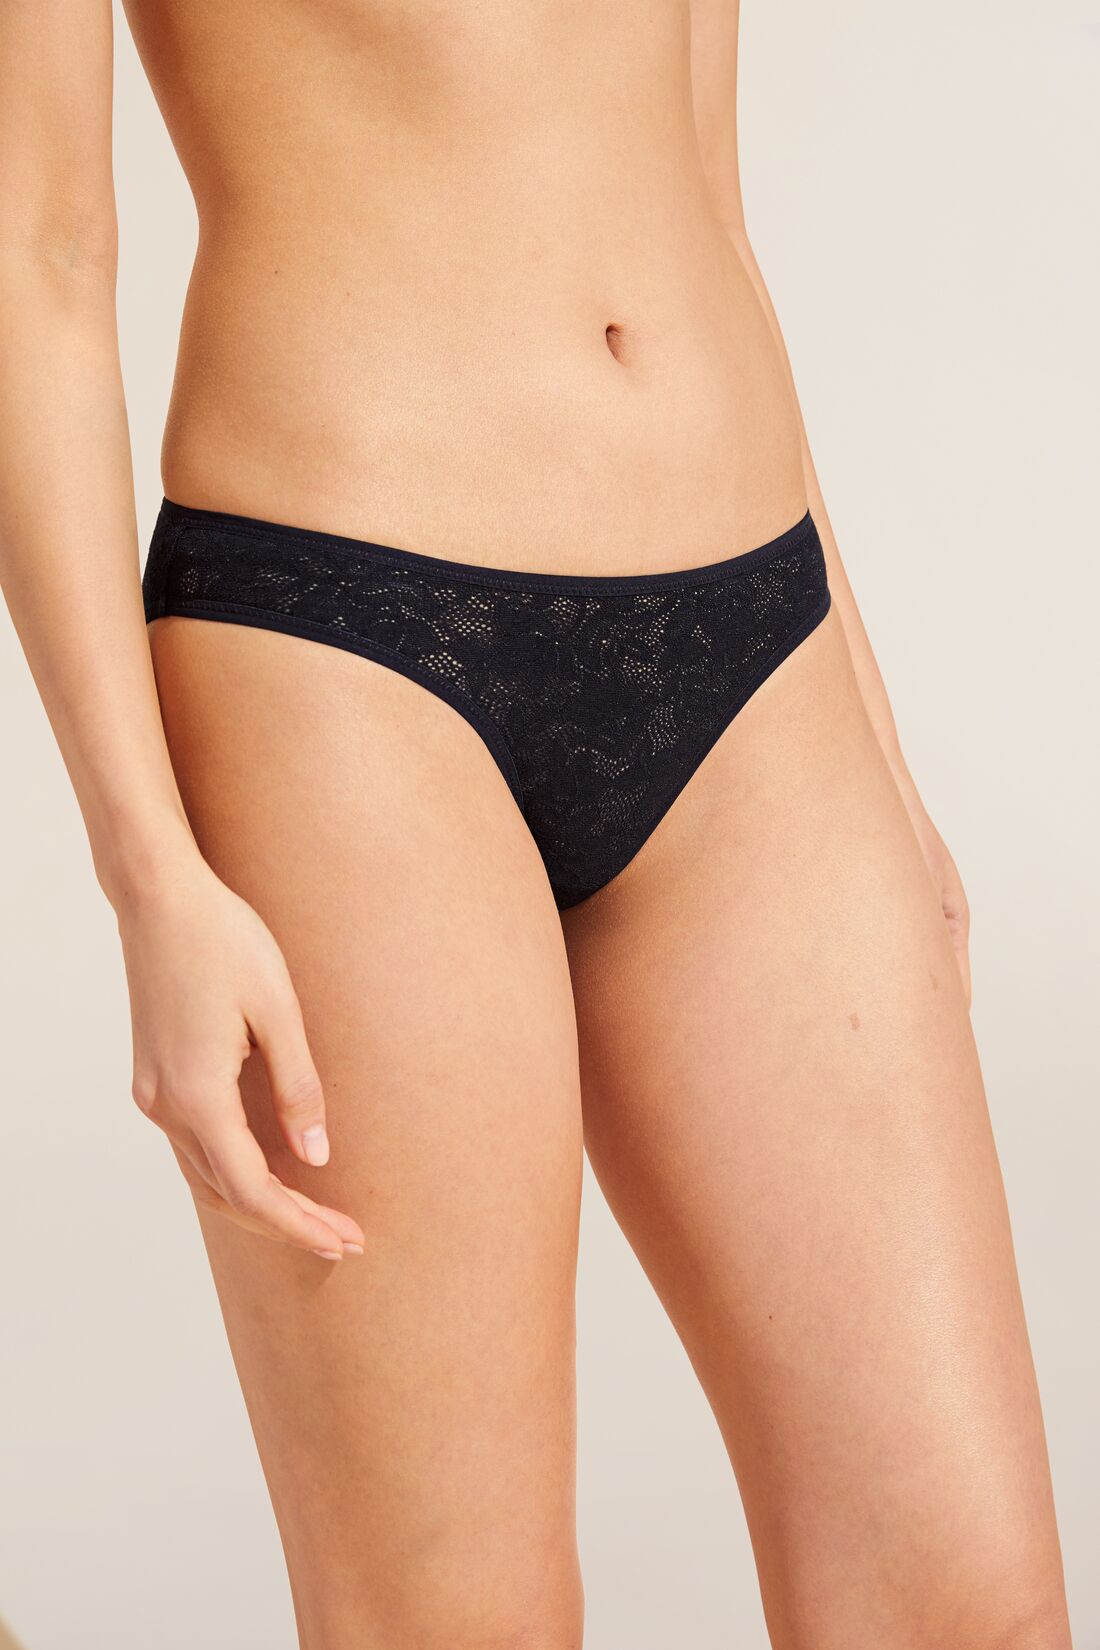 Soft Stretch Recycled Lace High Leg Brief